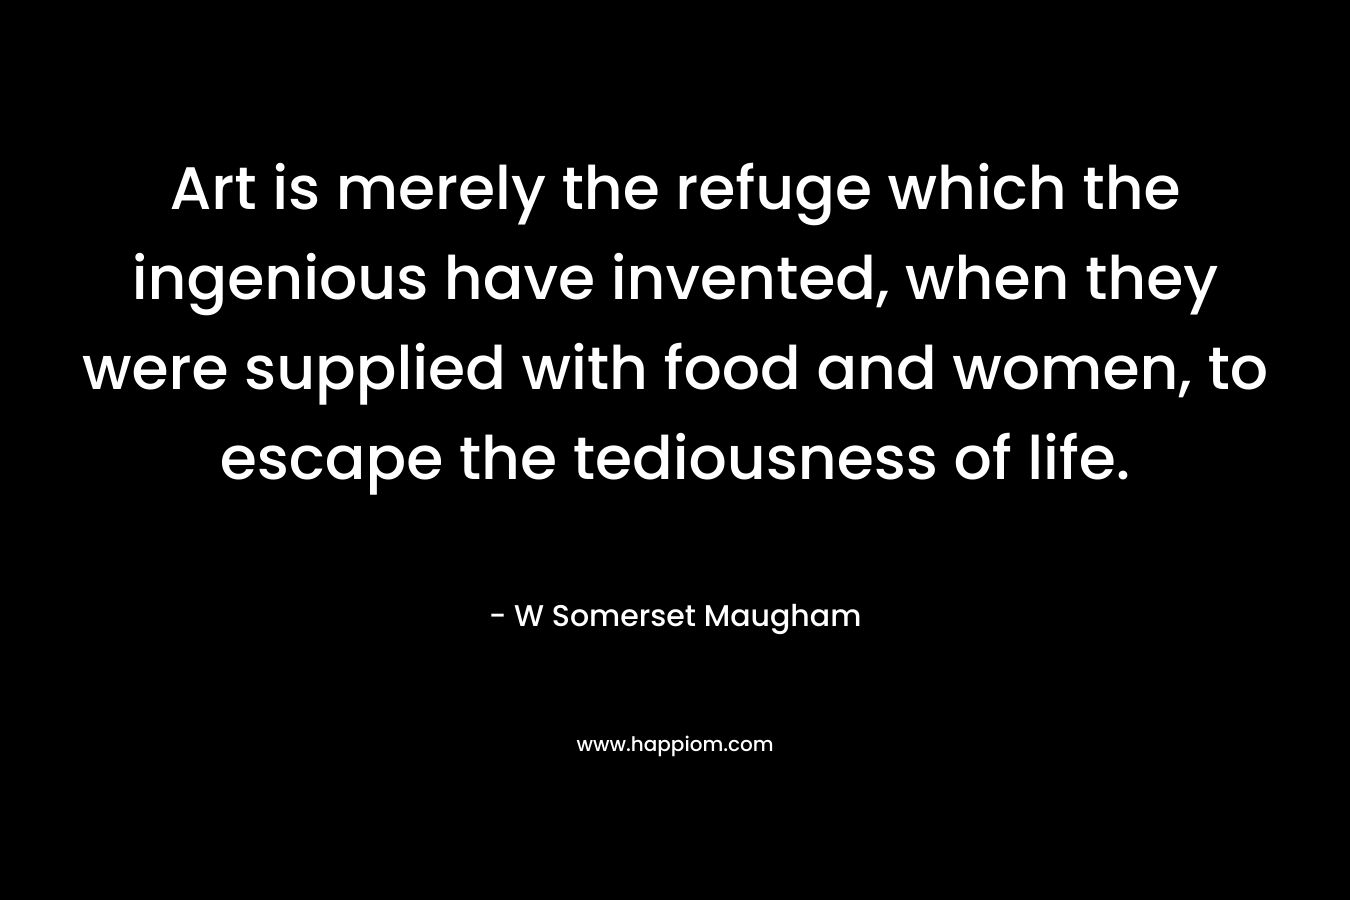 Art is merely the refuge which the ingenious have invented, when they were supplied with food and women, to escape the tediousness of life. – W Somerset Maugham